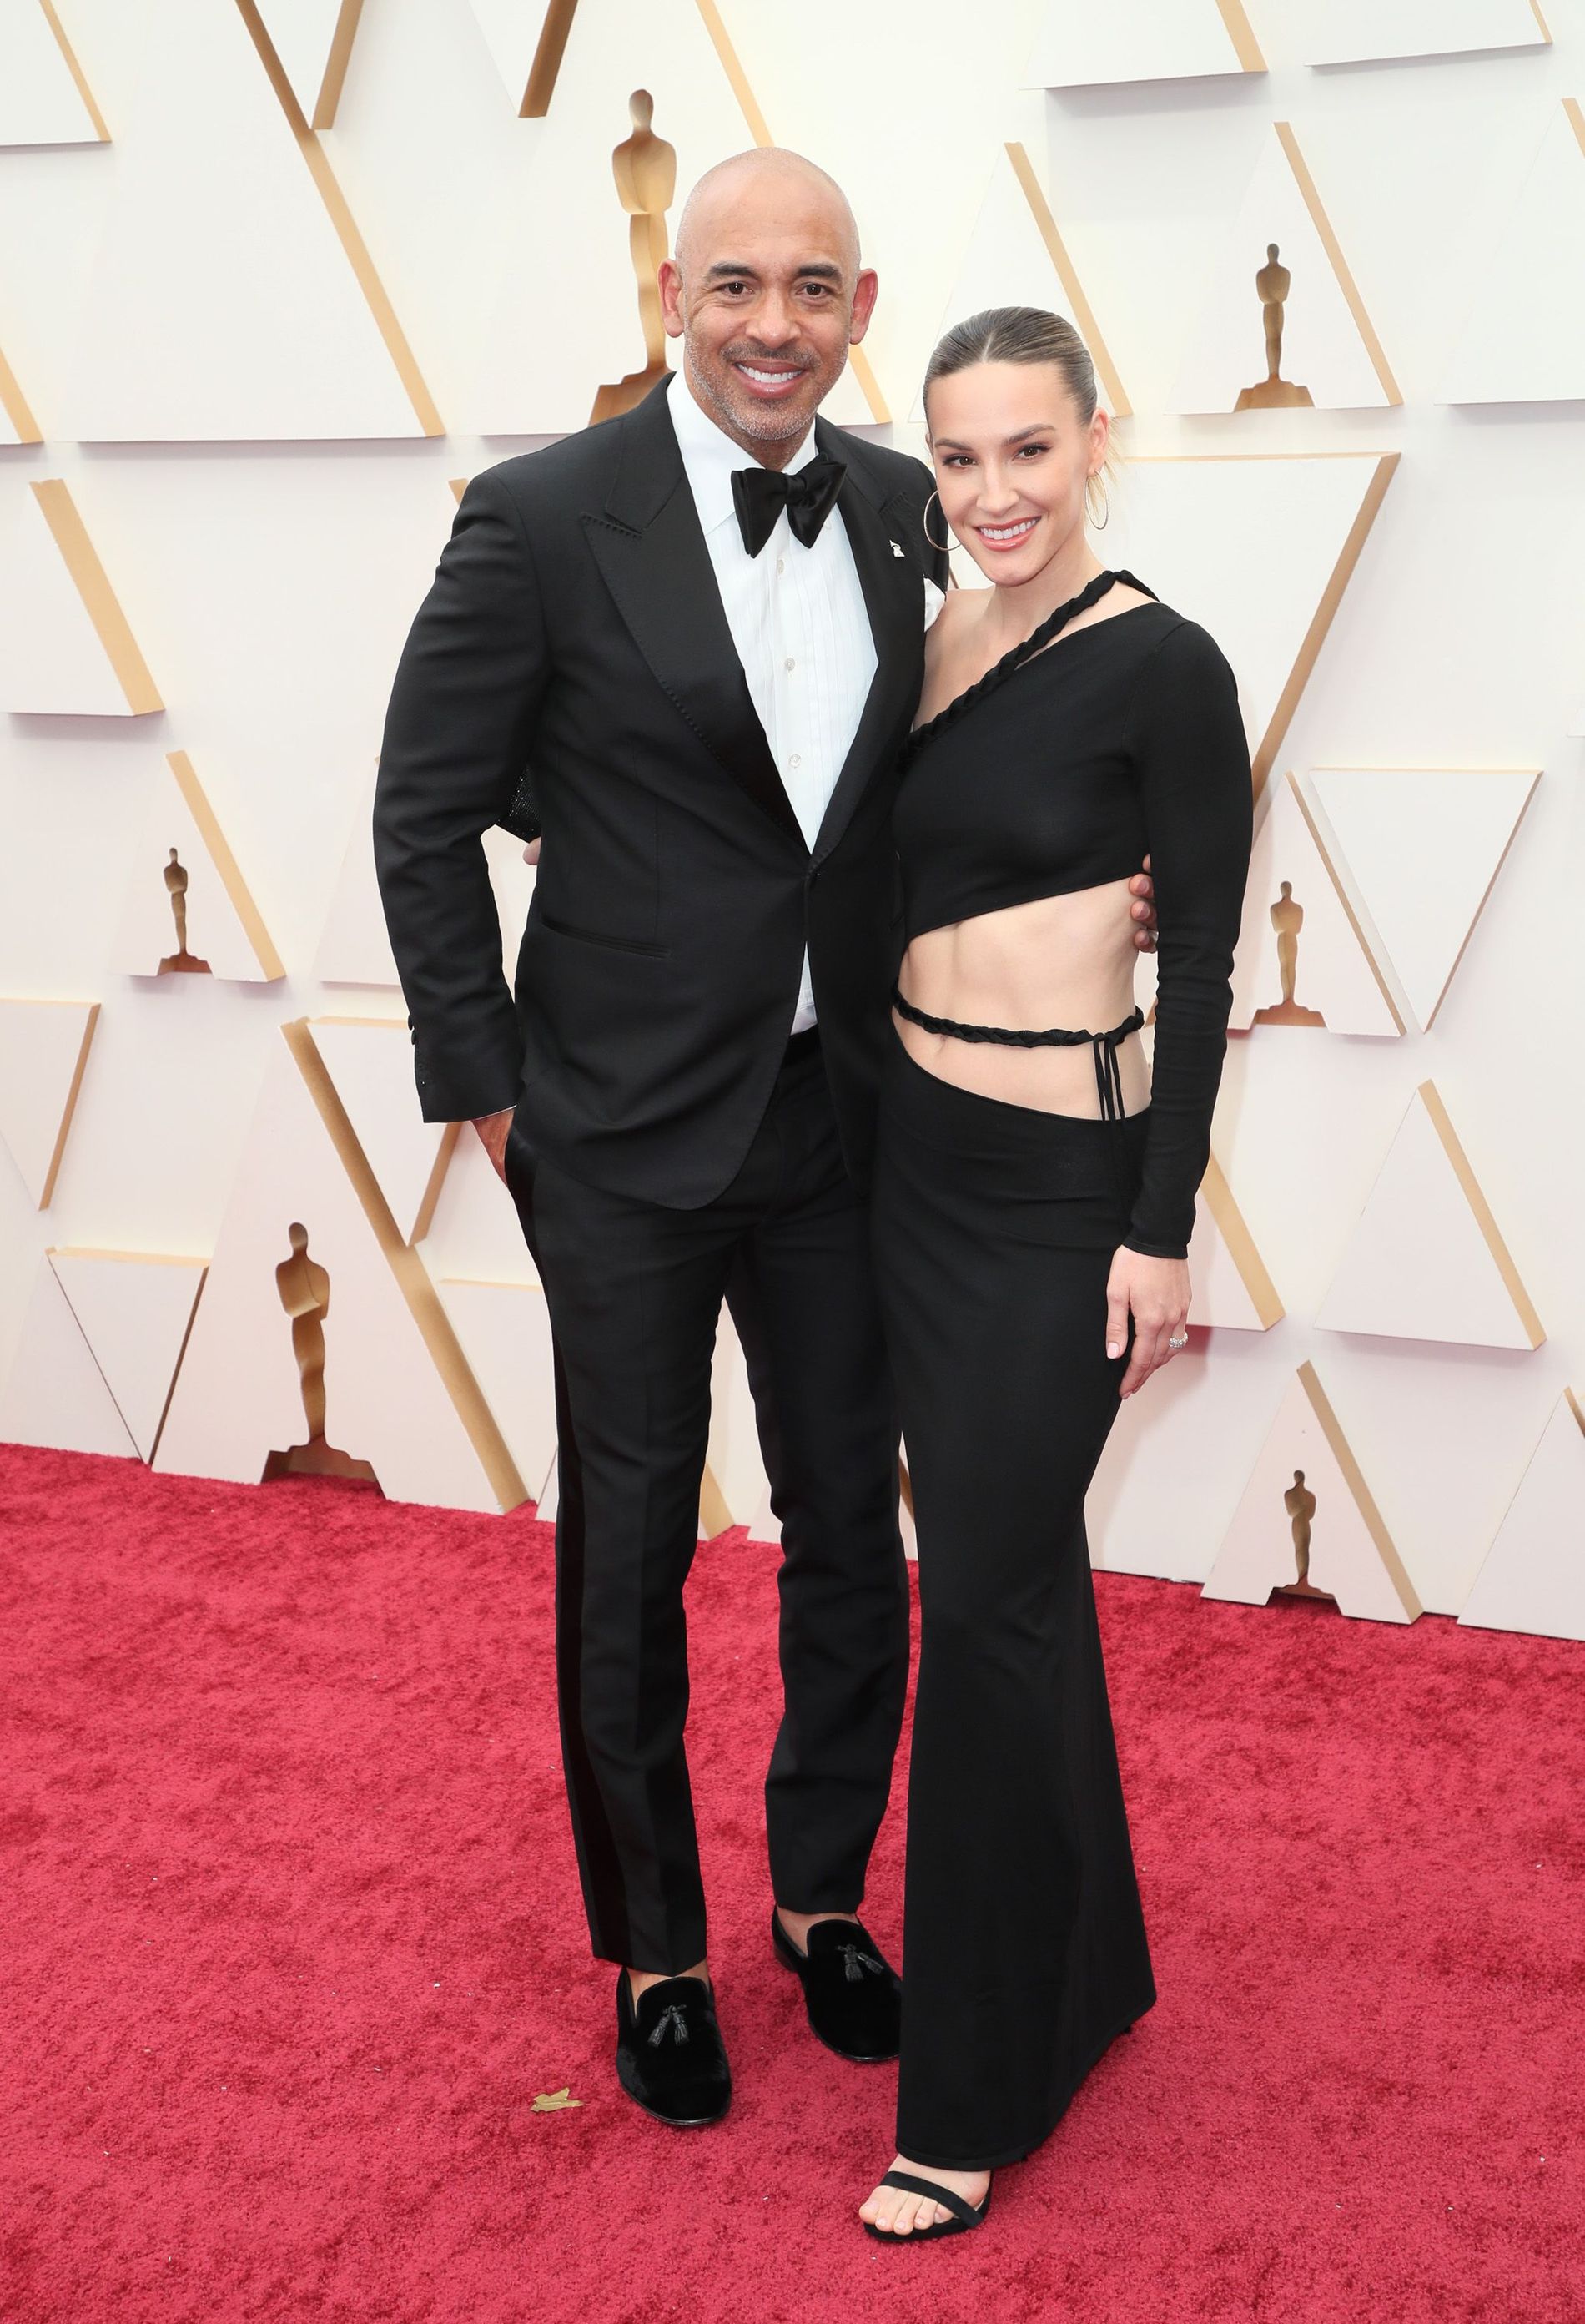 Renate Reinsve Wore Louis Vuitton To The 2022 Oscars